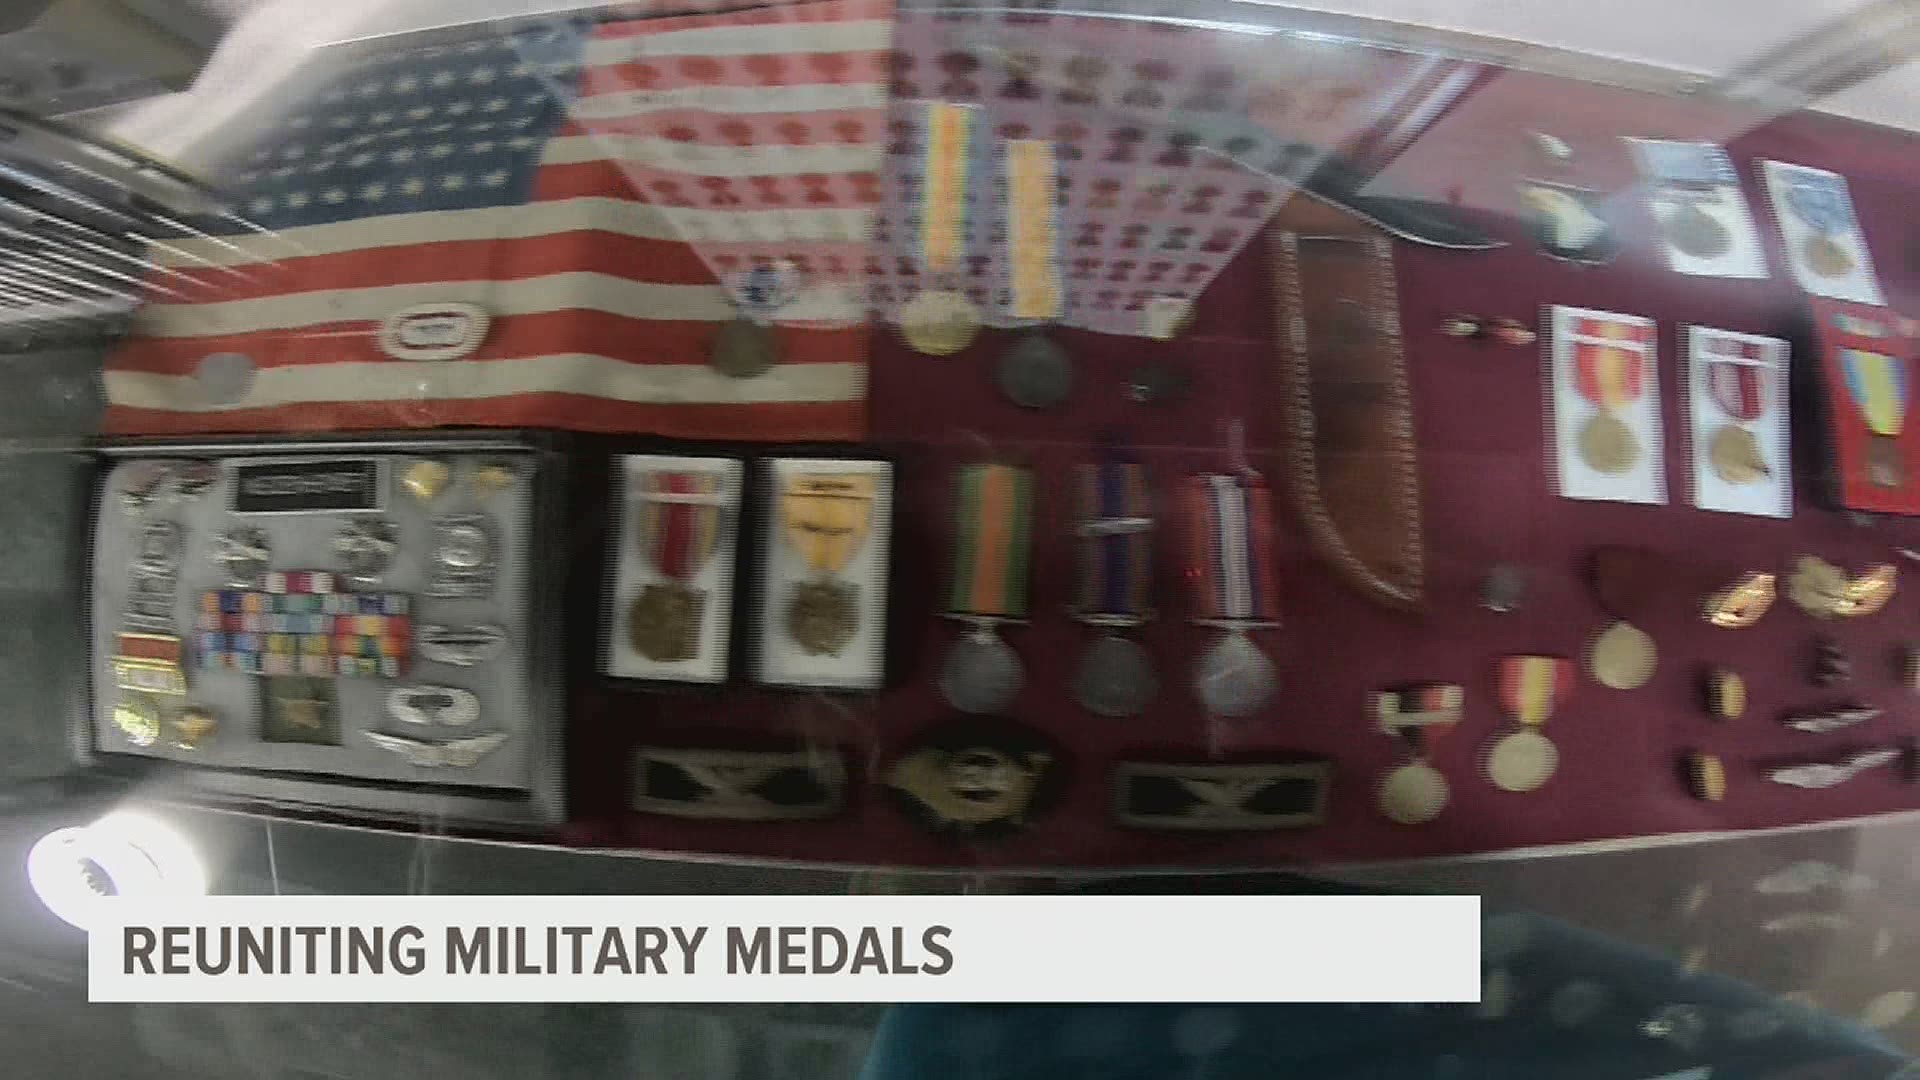 Pennsylvania's Treasury is focused on returning hundreds of military medals that have become unclaimed property in possession of the state